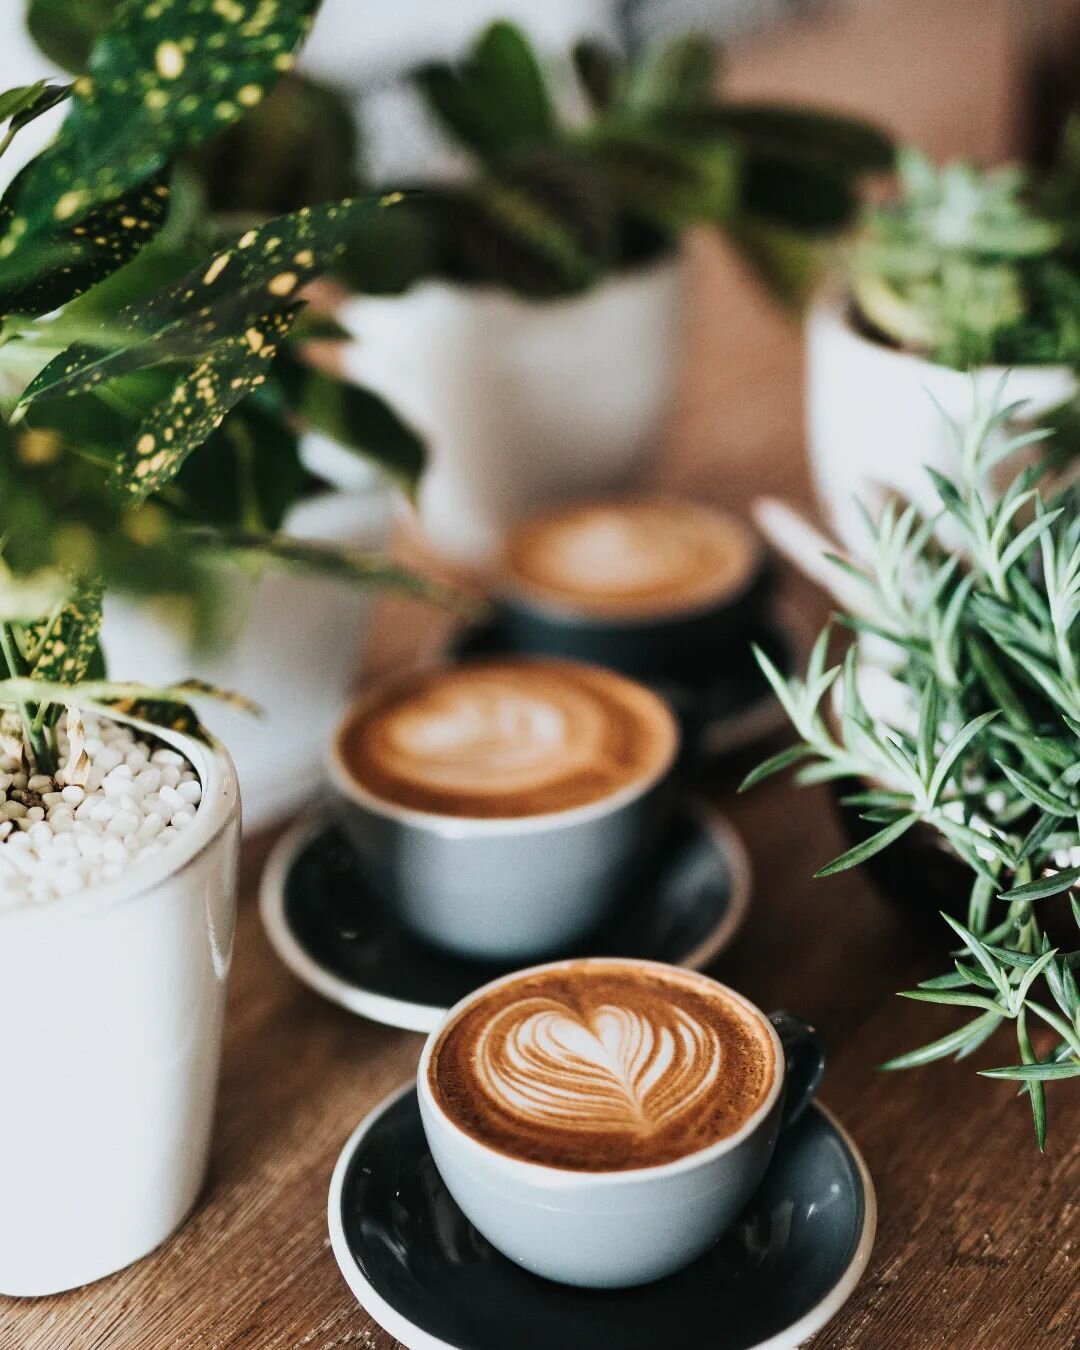 Happy international coffee day, take a moment on this day to enjoy a cup of coffee and take time to connect with others.
.
.
.
.
#elvoyagecoffee #elvoyage #coffee #groundcoffee #wholebeancoffee #guatemalacoffee #socialimpact #businessthatdoesgood #na